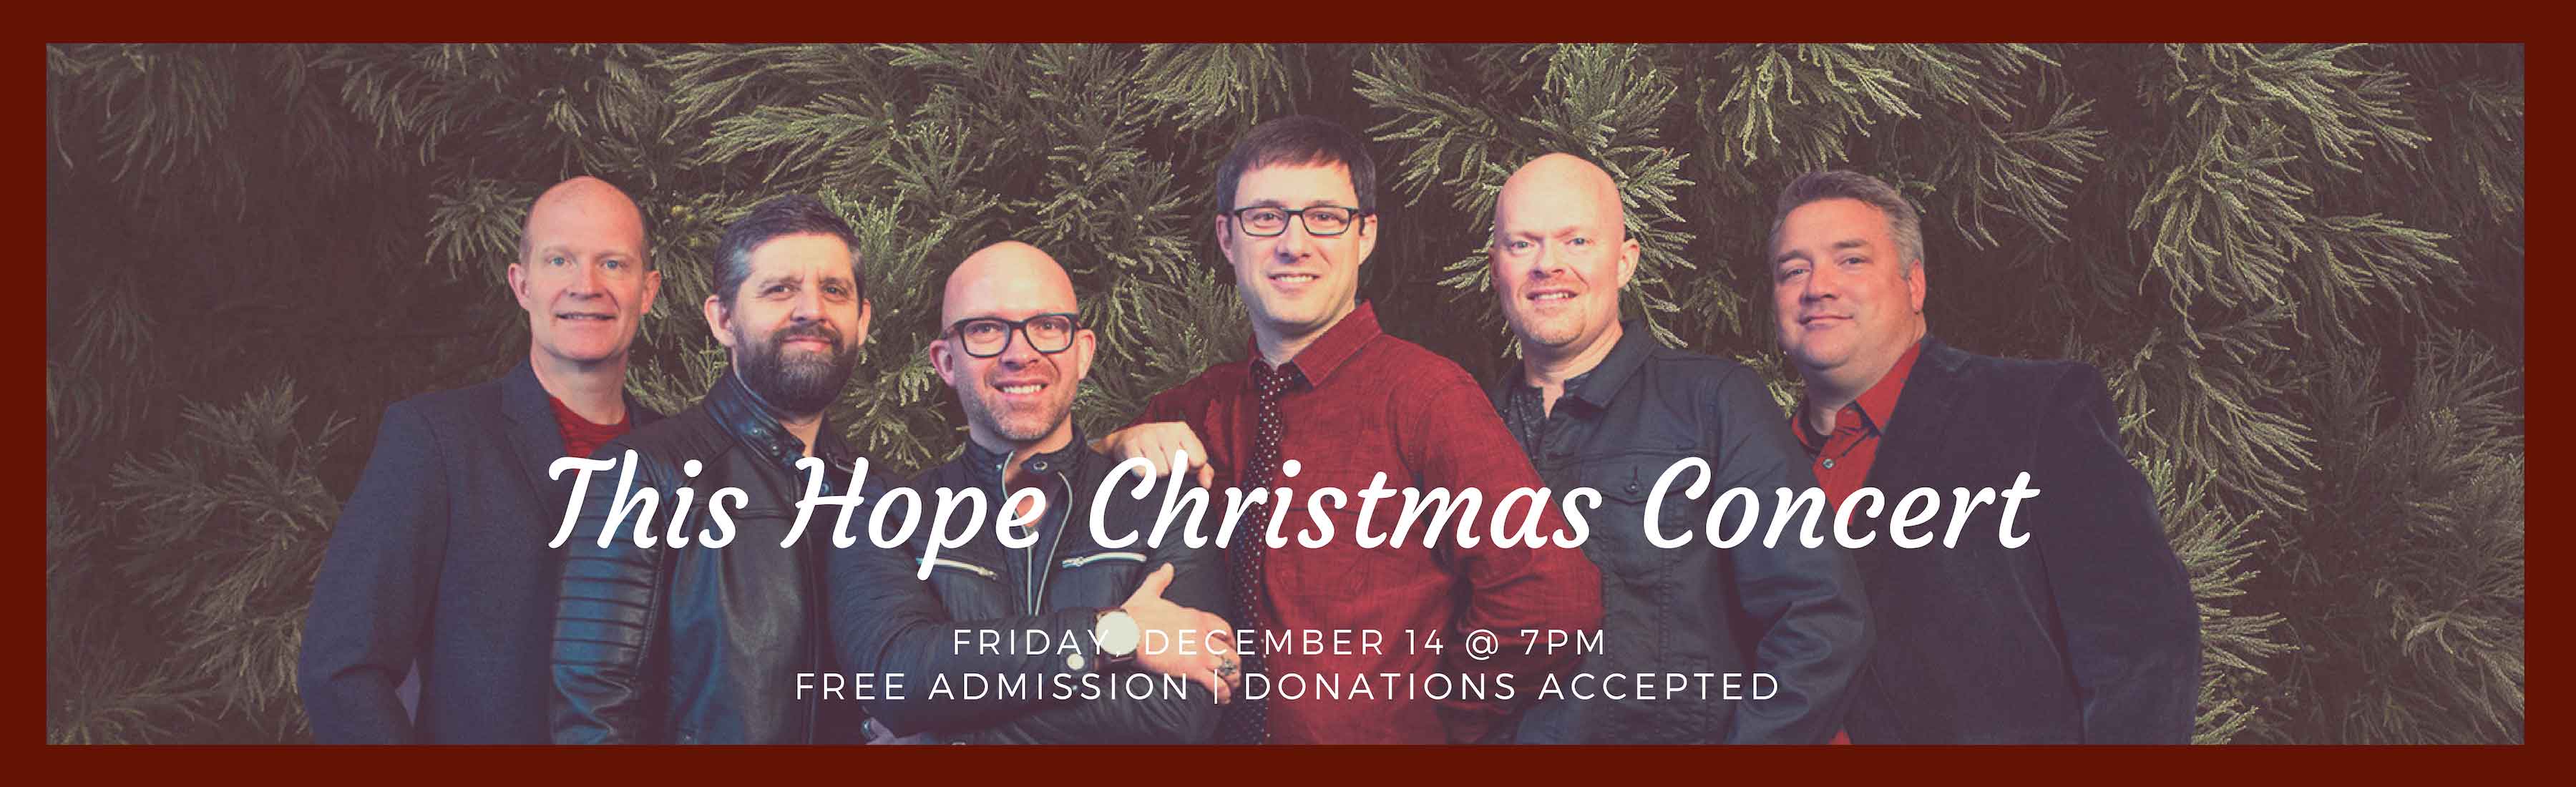 This Hope Christmas Concert Eastwood Baptist Church in Tulsa